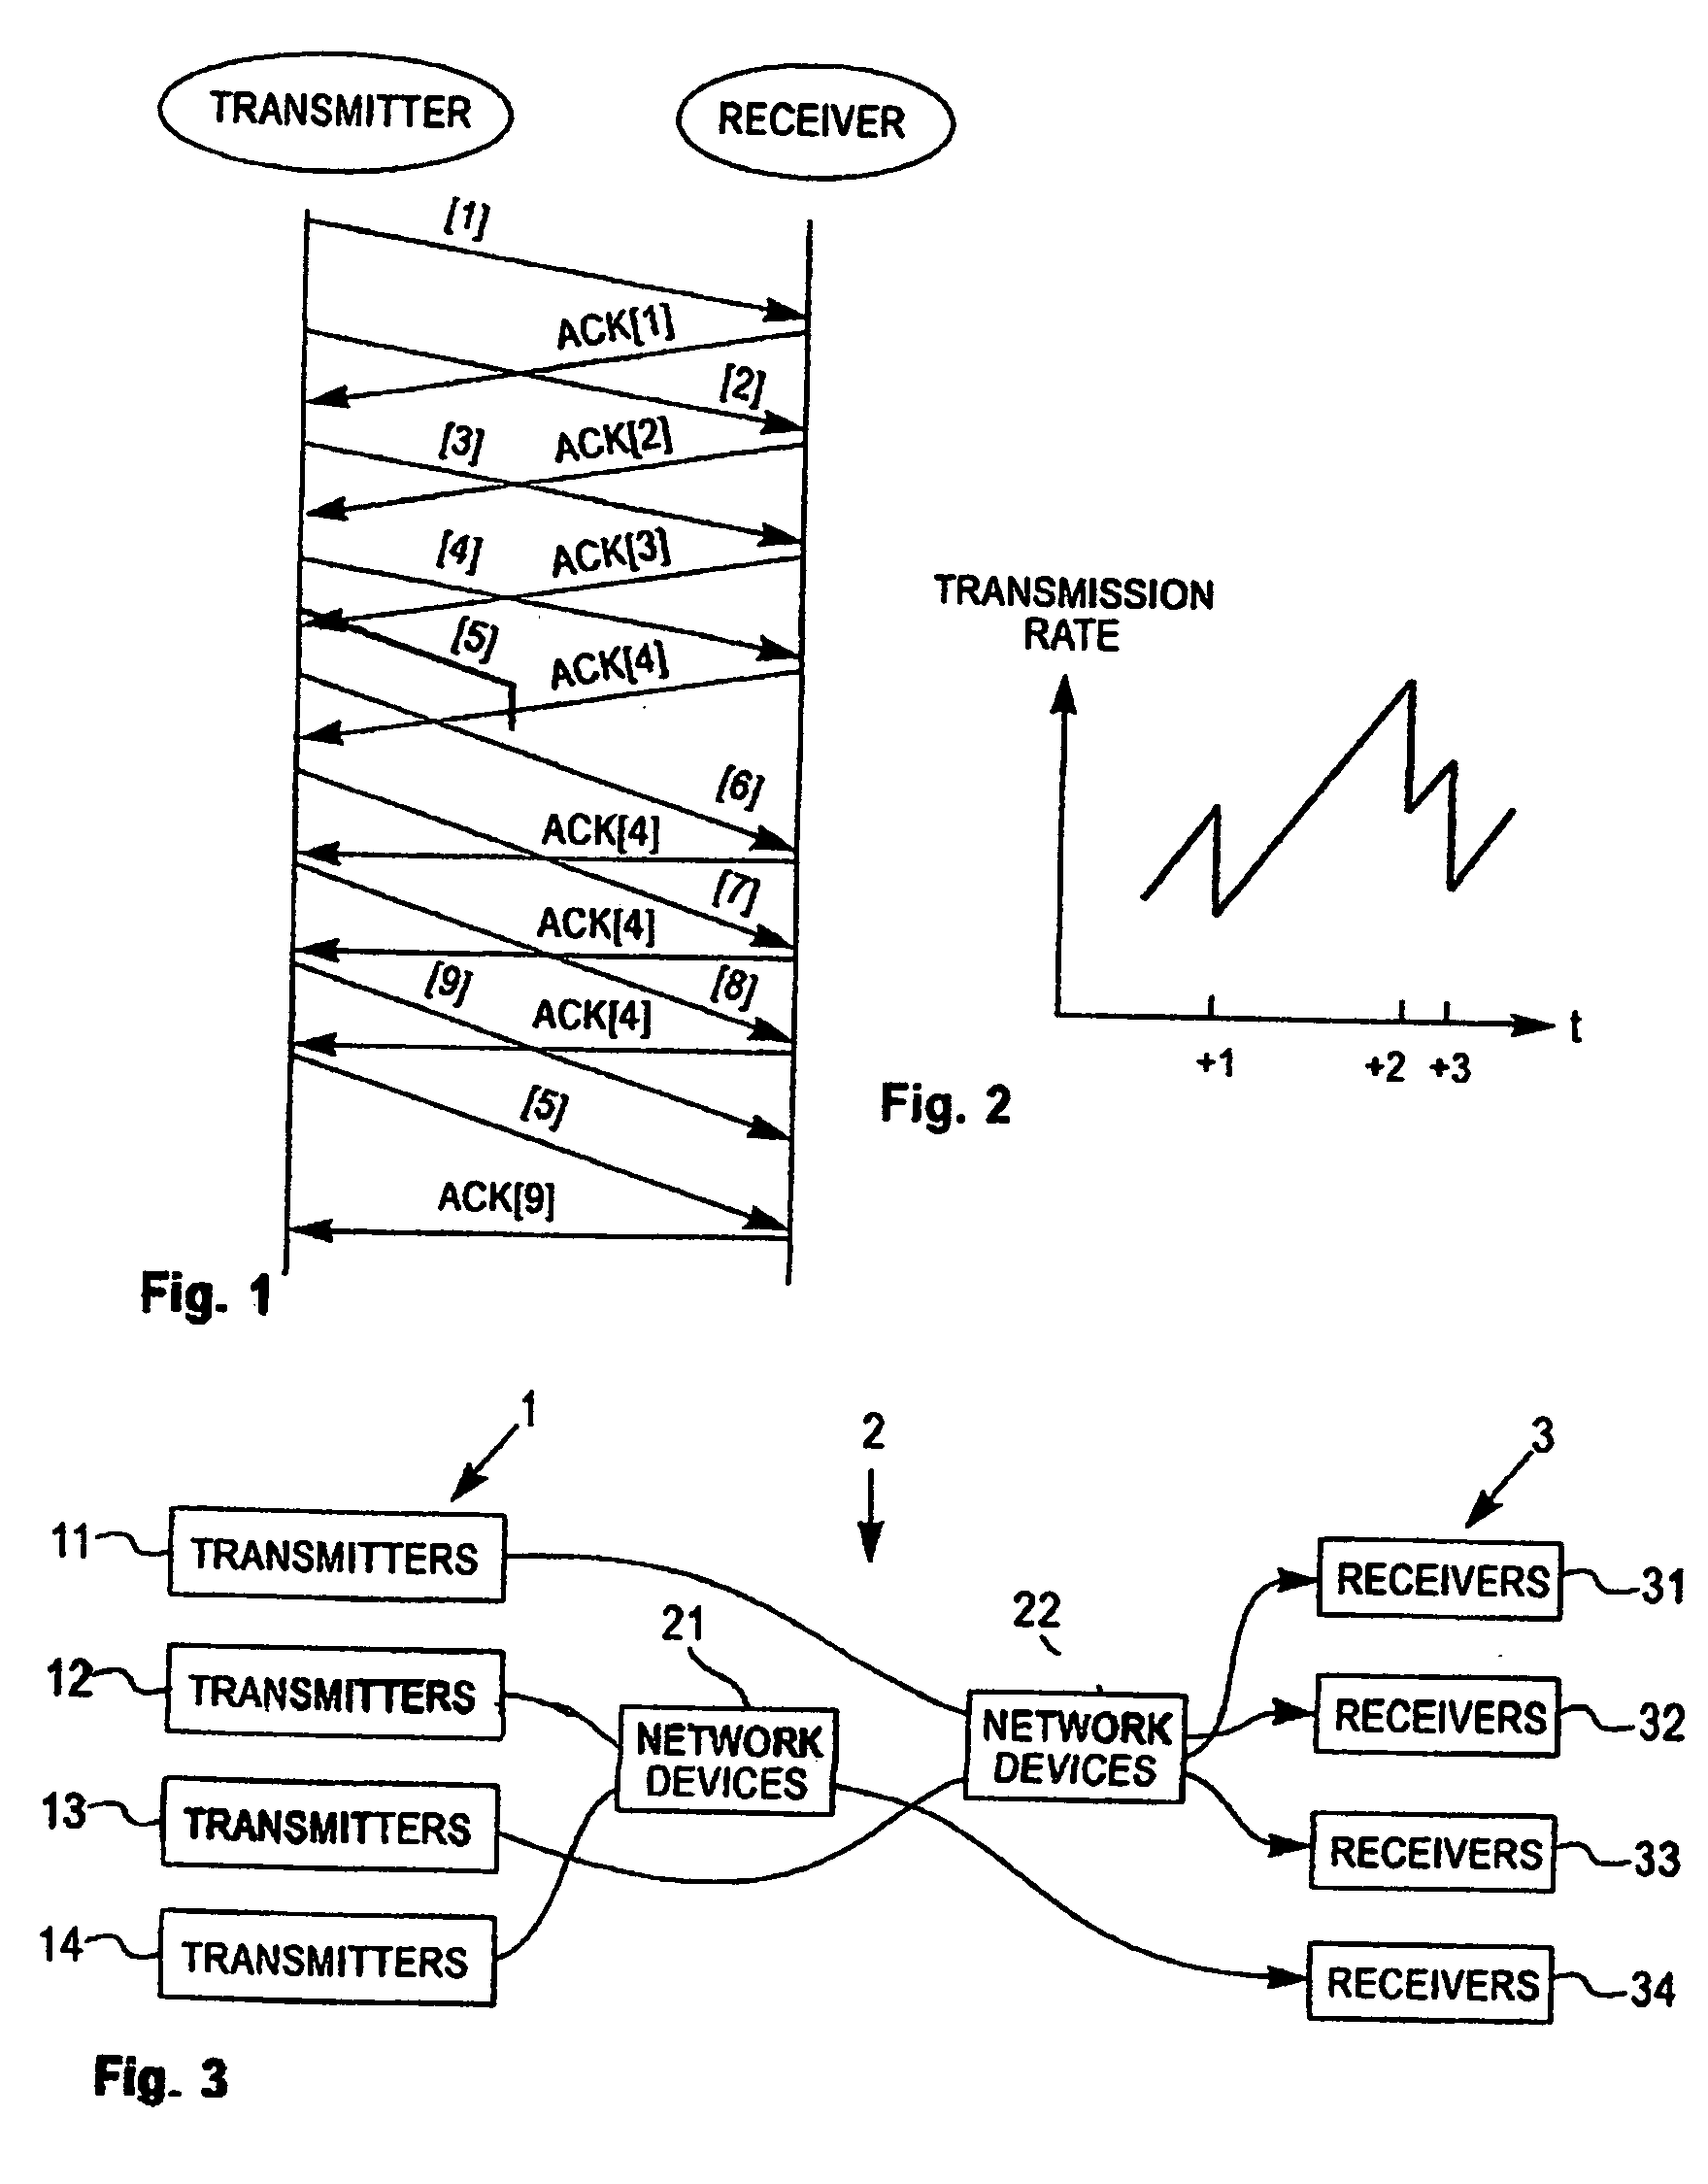 System and program storage device for controlling data packet flows by manipulating data packets according to an actual manipulation rate